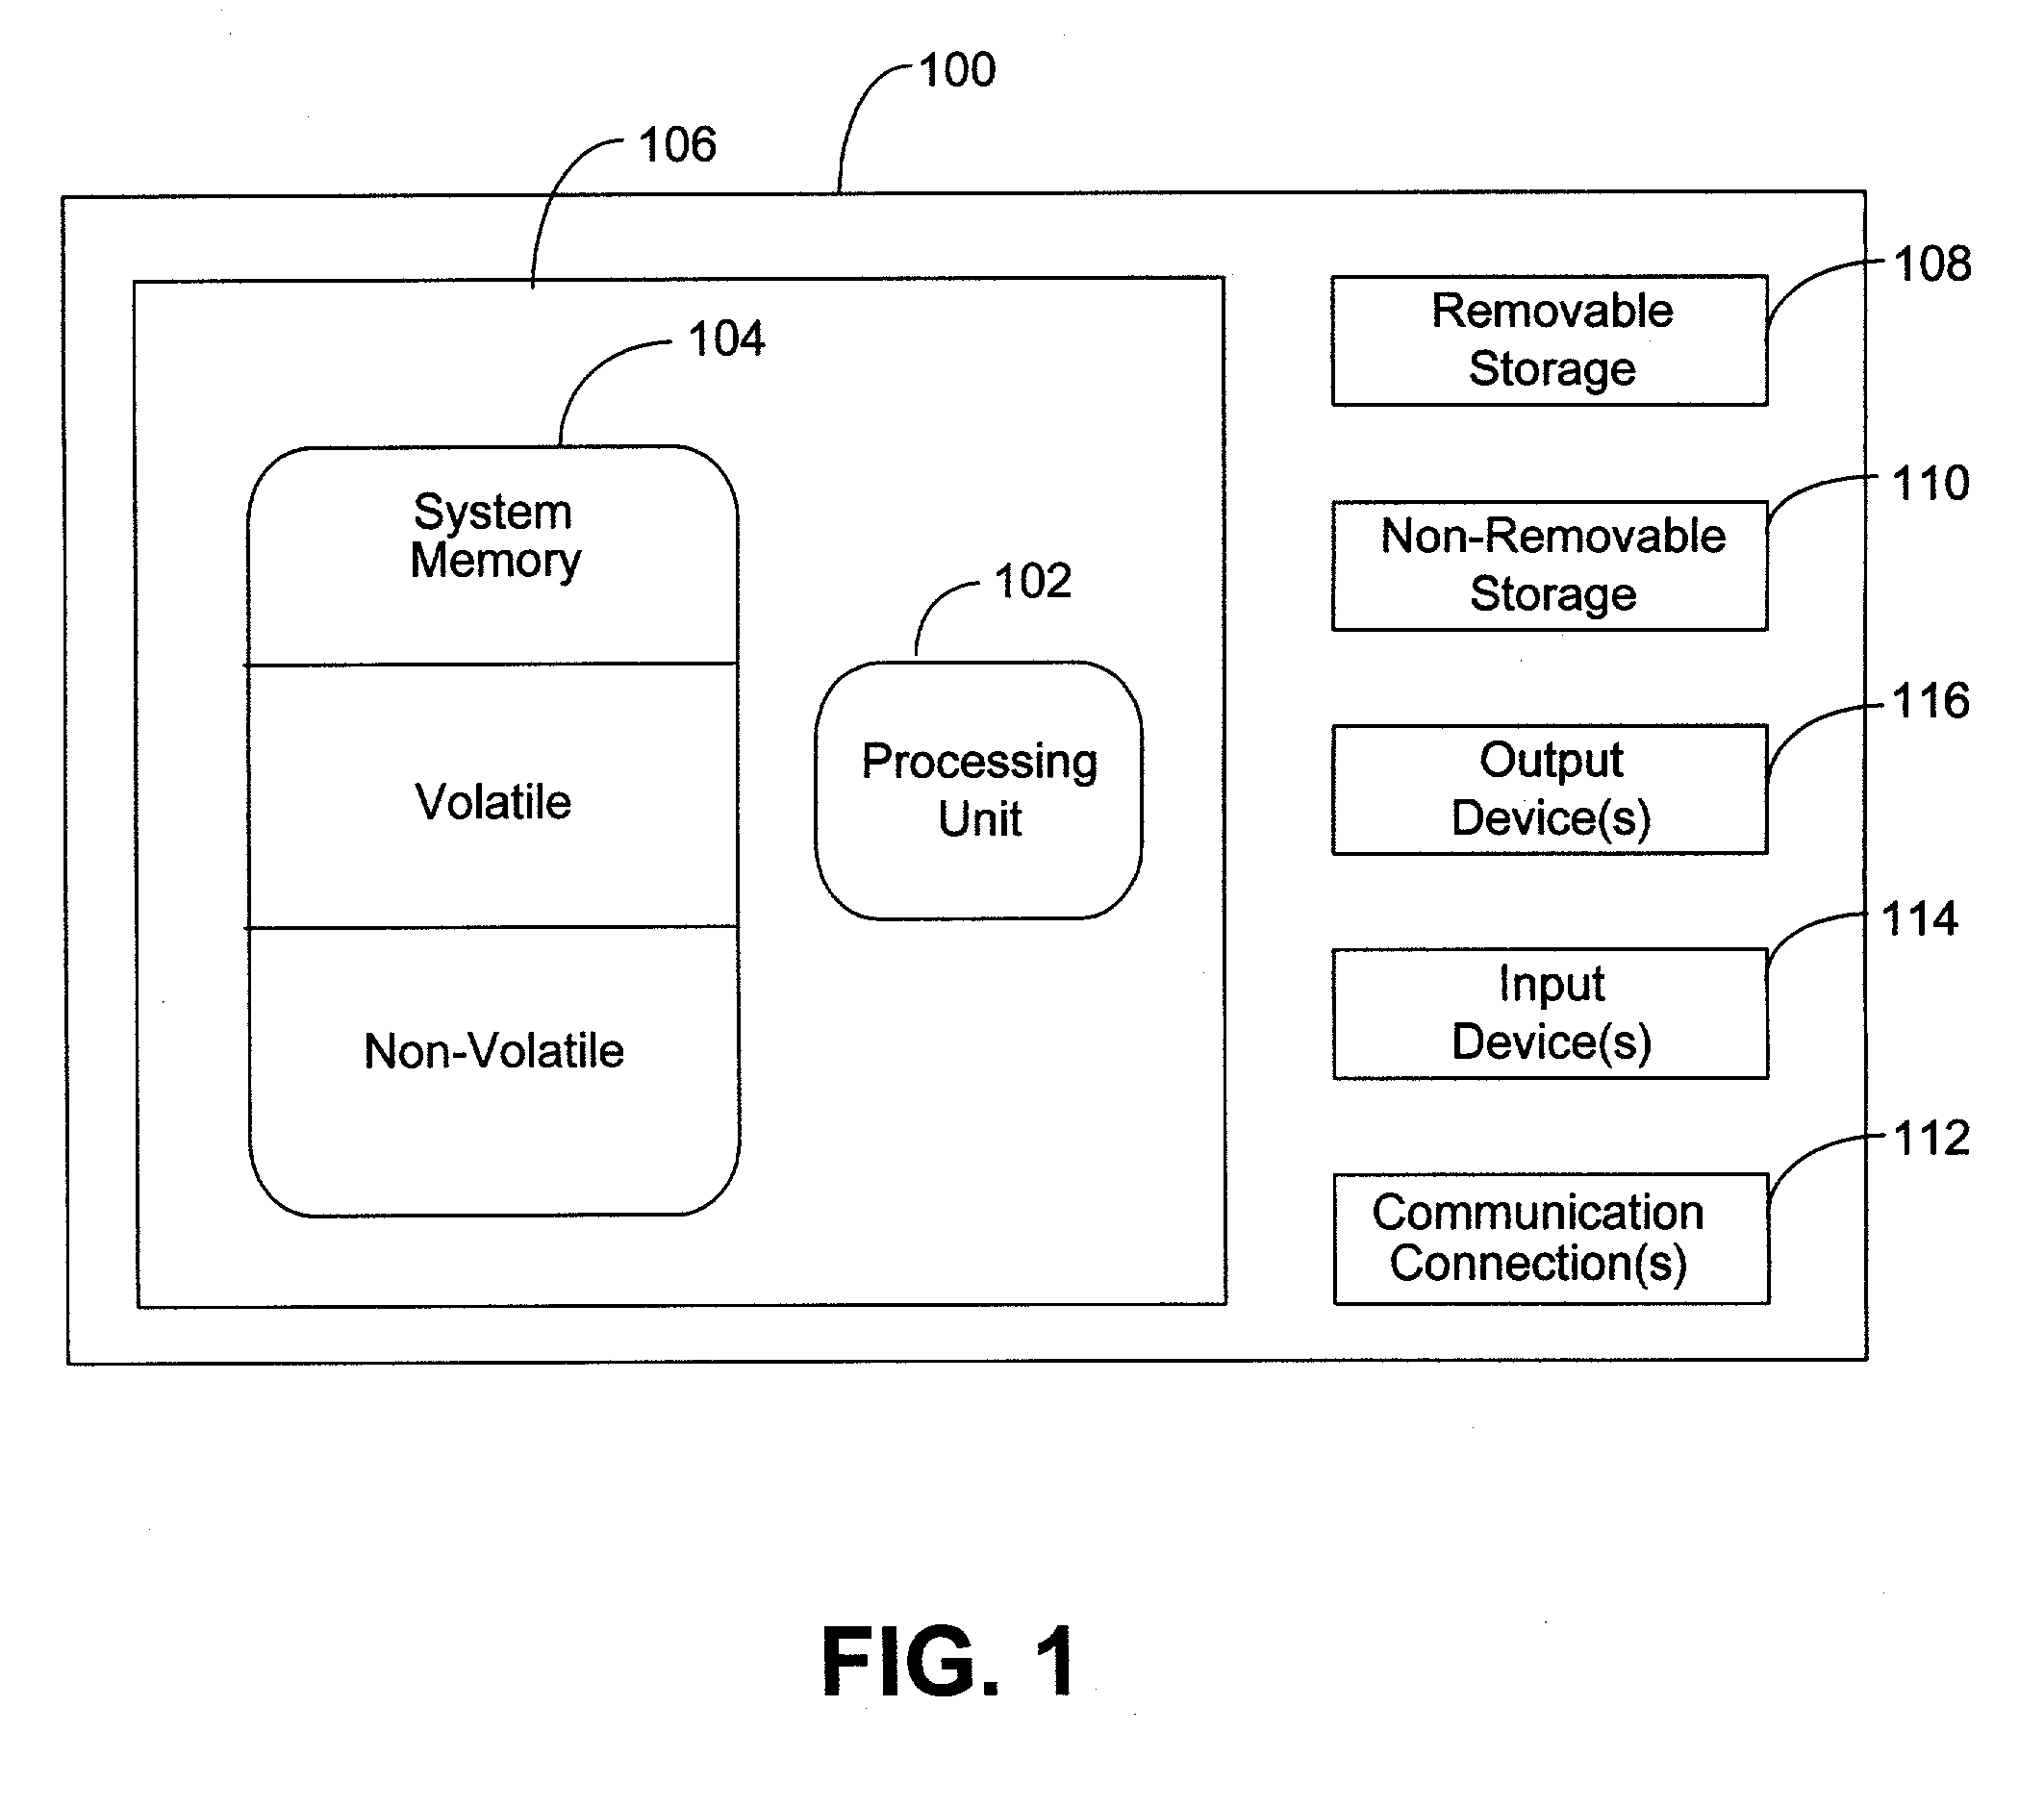 Method and system for transferring and sharing images between devices and locations